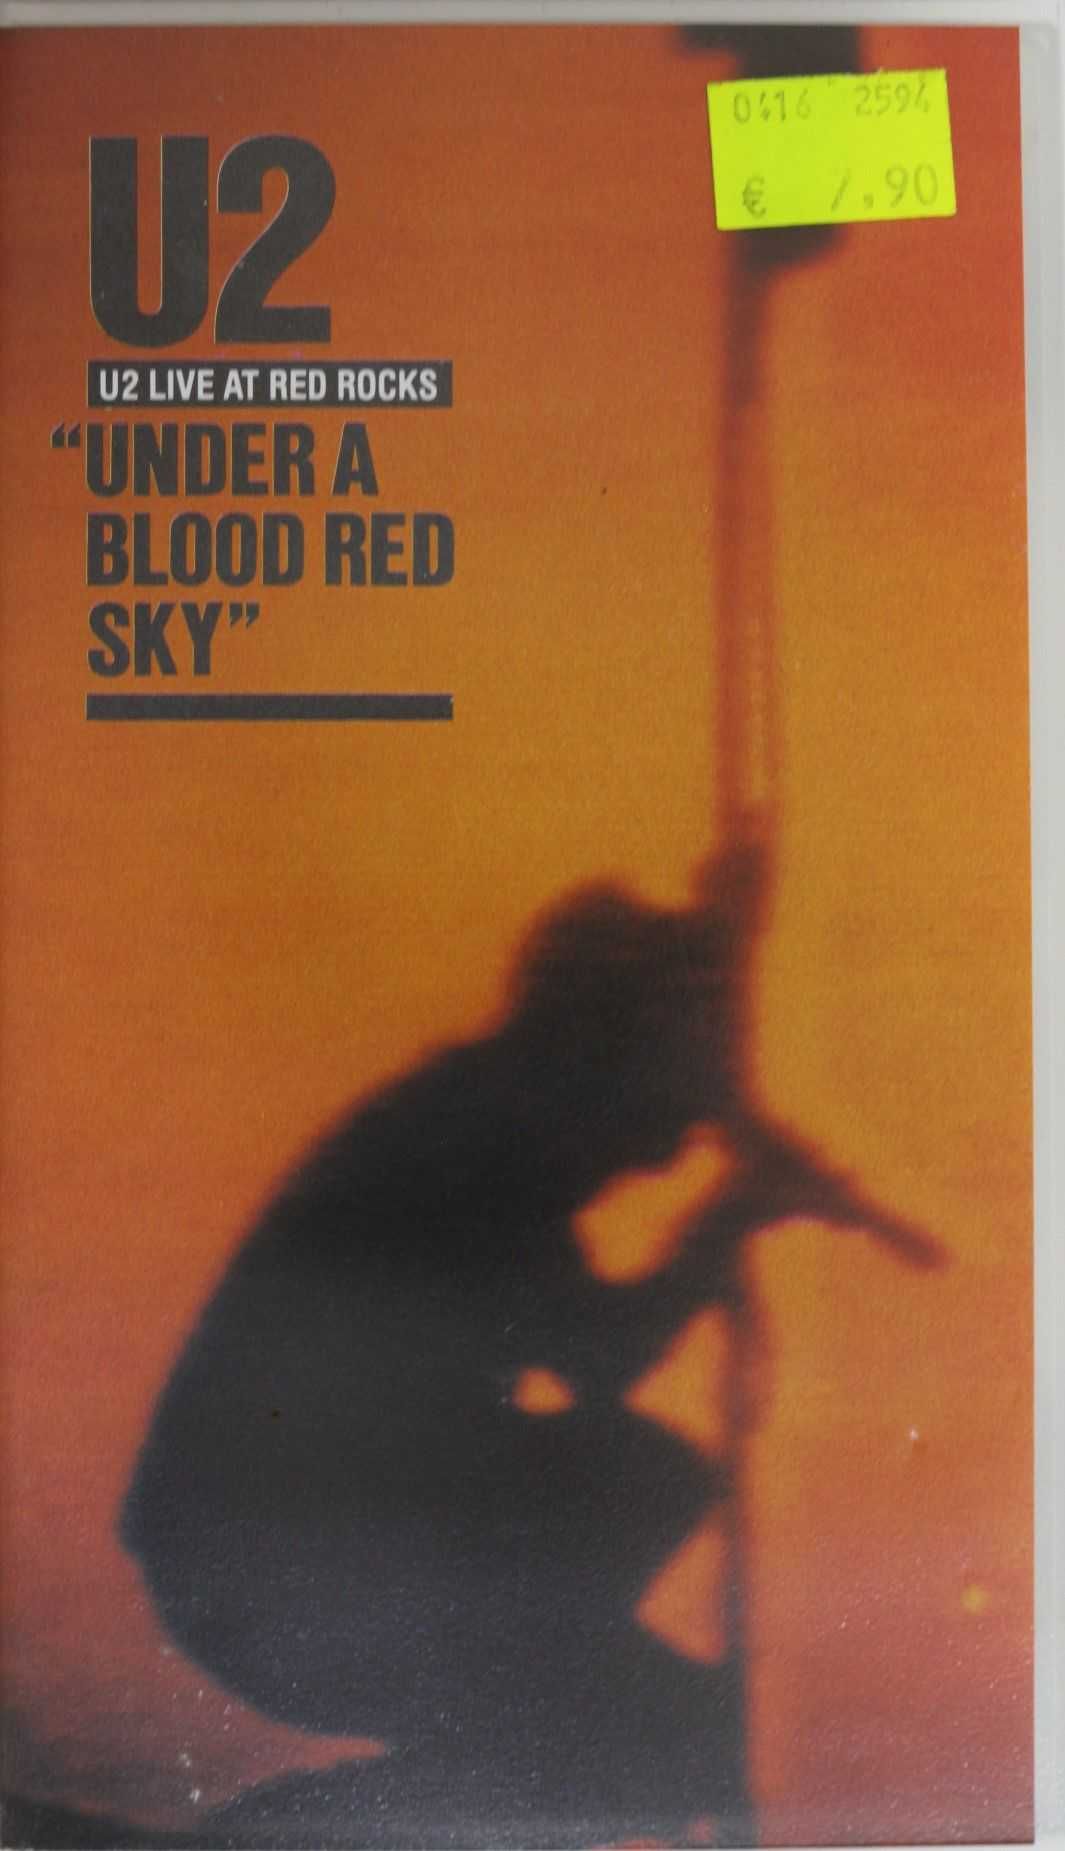 VHS Musical "U2 Live At Red Rocks - Under a Blood Red Sky"